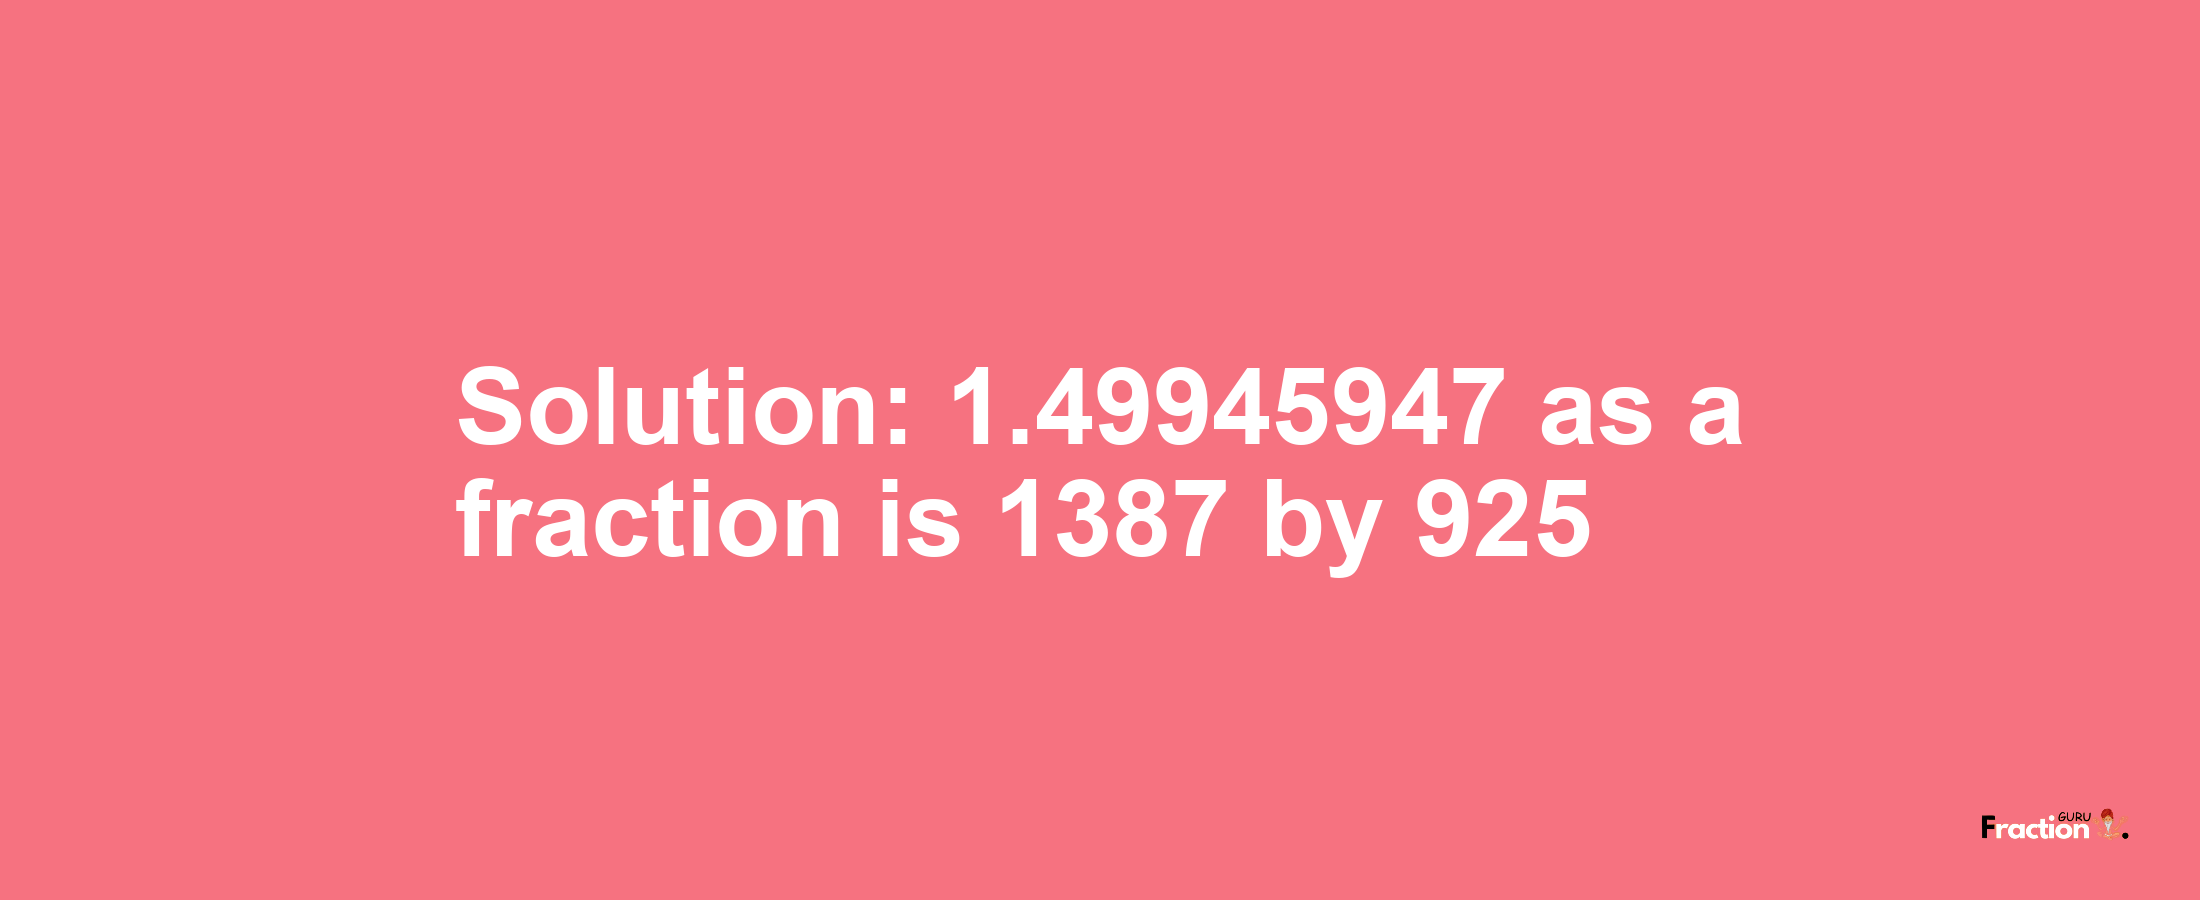 Solution:1.49945947 as a fraction is 1387/925